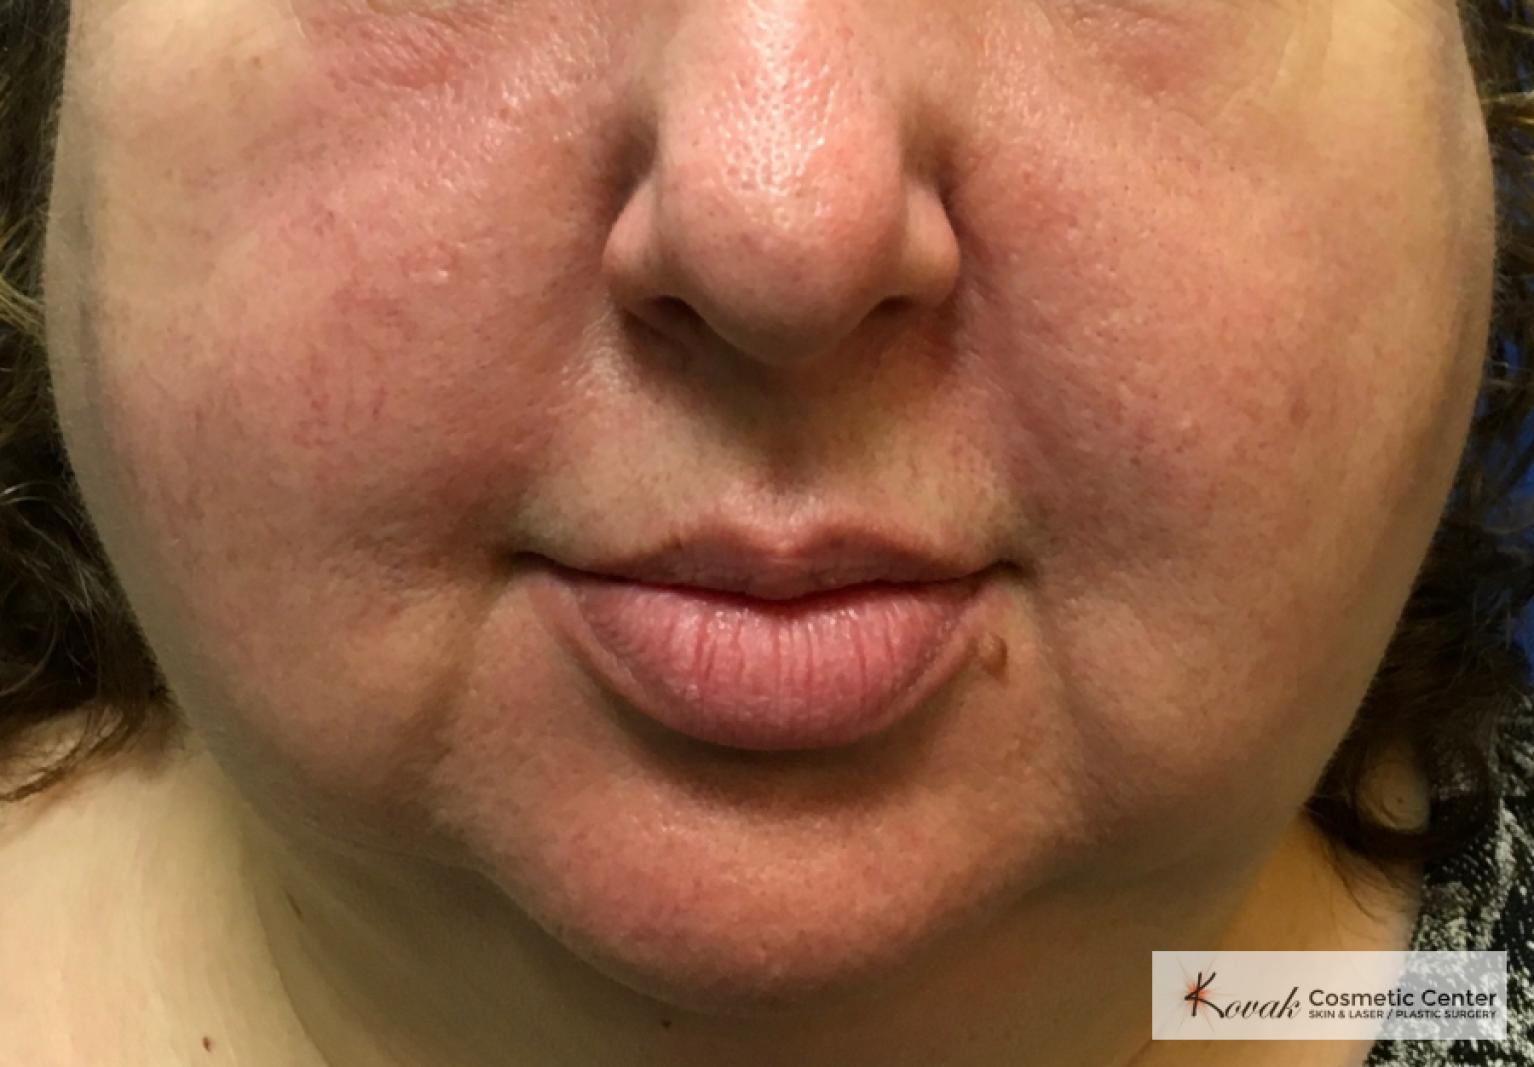 Laser Liposuction using the Vaser system of the jawline on a 52 year old female - Before 